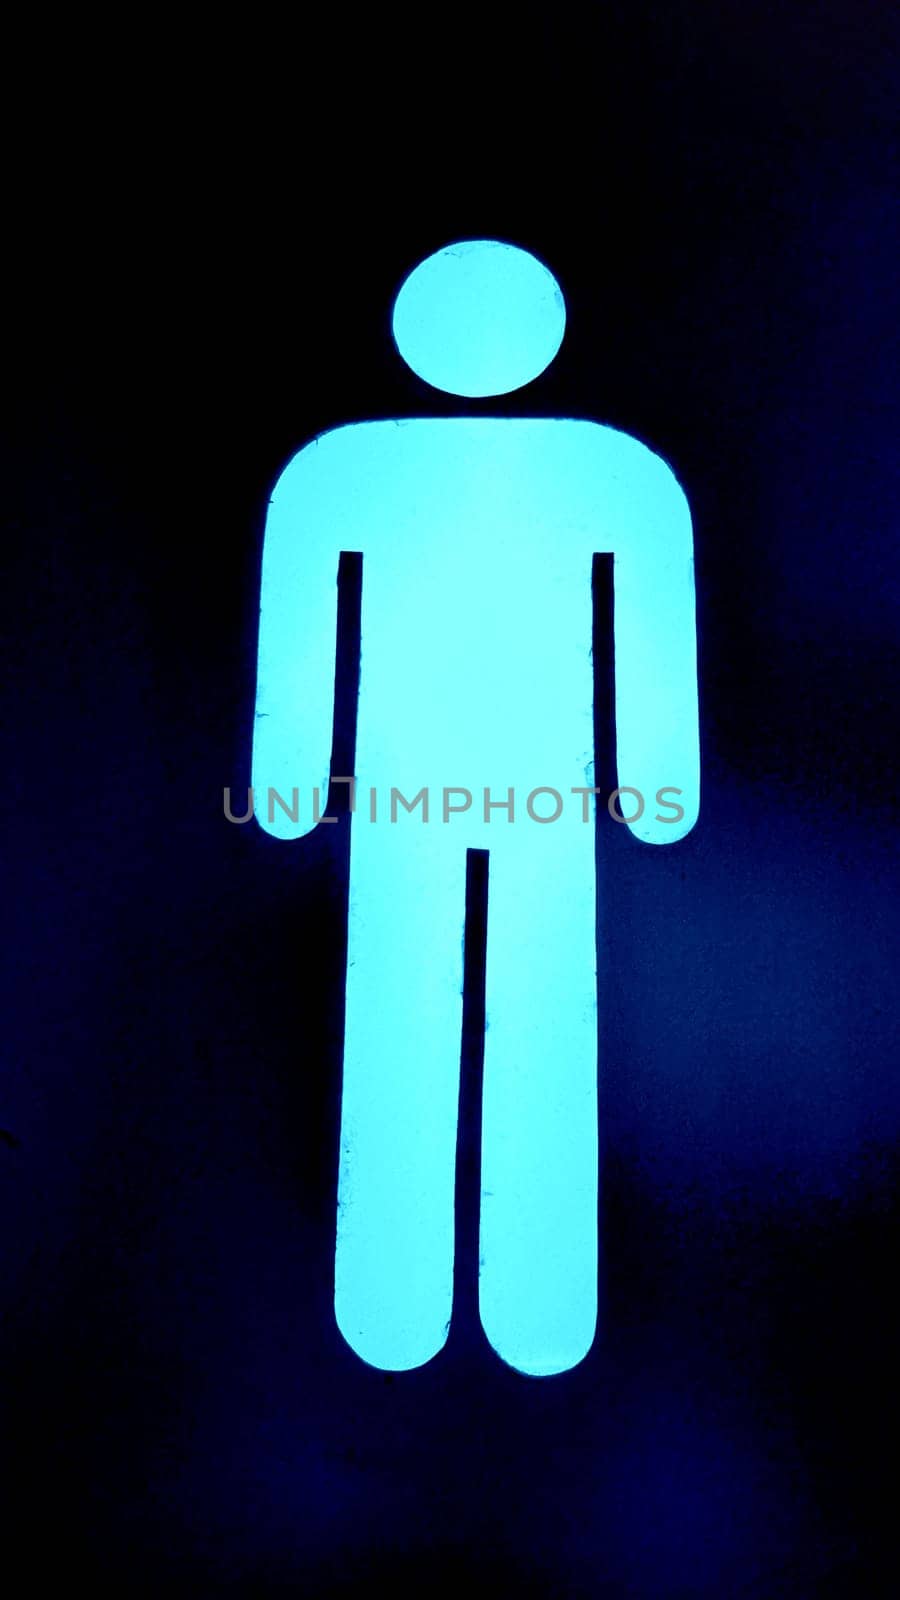 Men's signage and Symbol sign to indicate certain designated area with vibrant color could be used as multimedia creative content creation